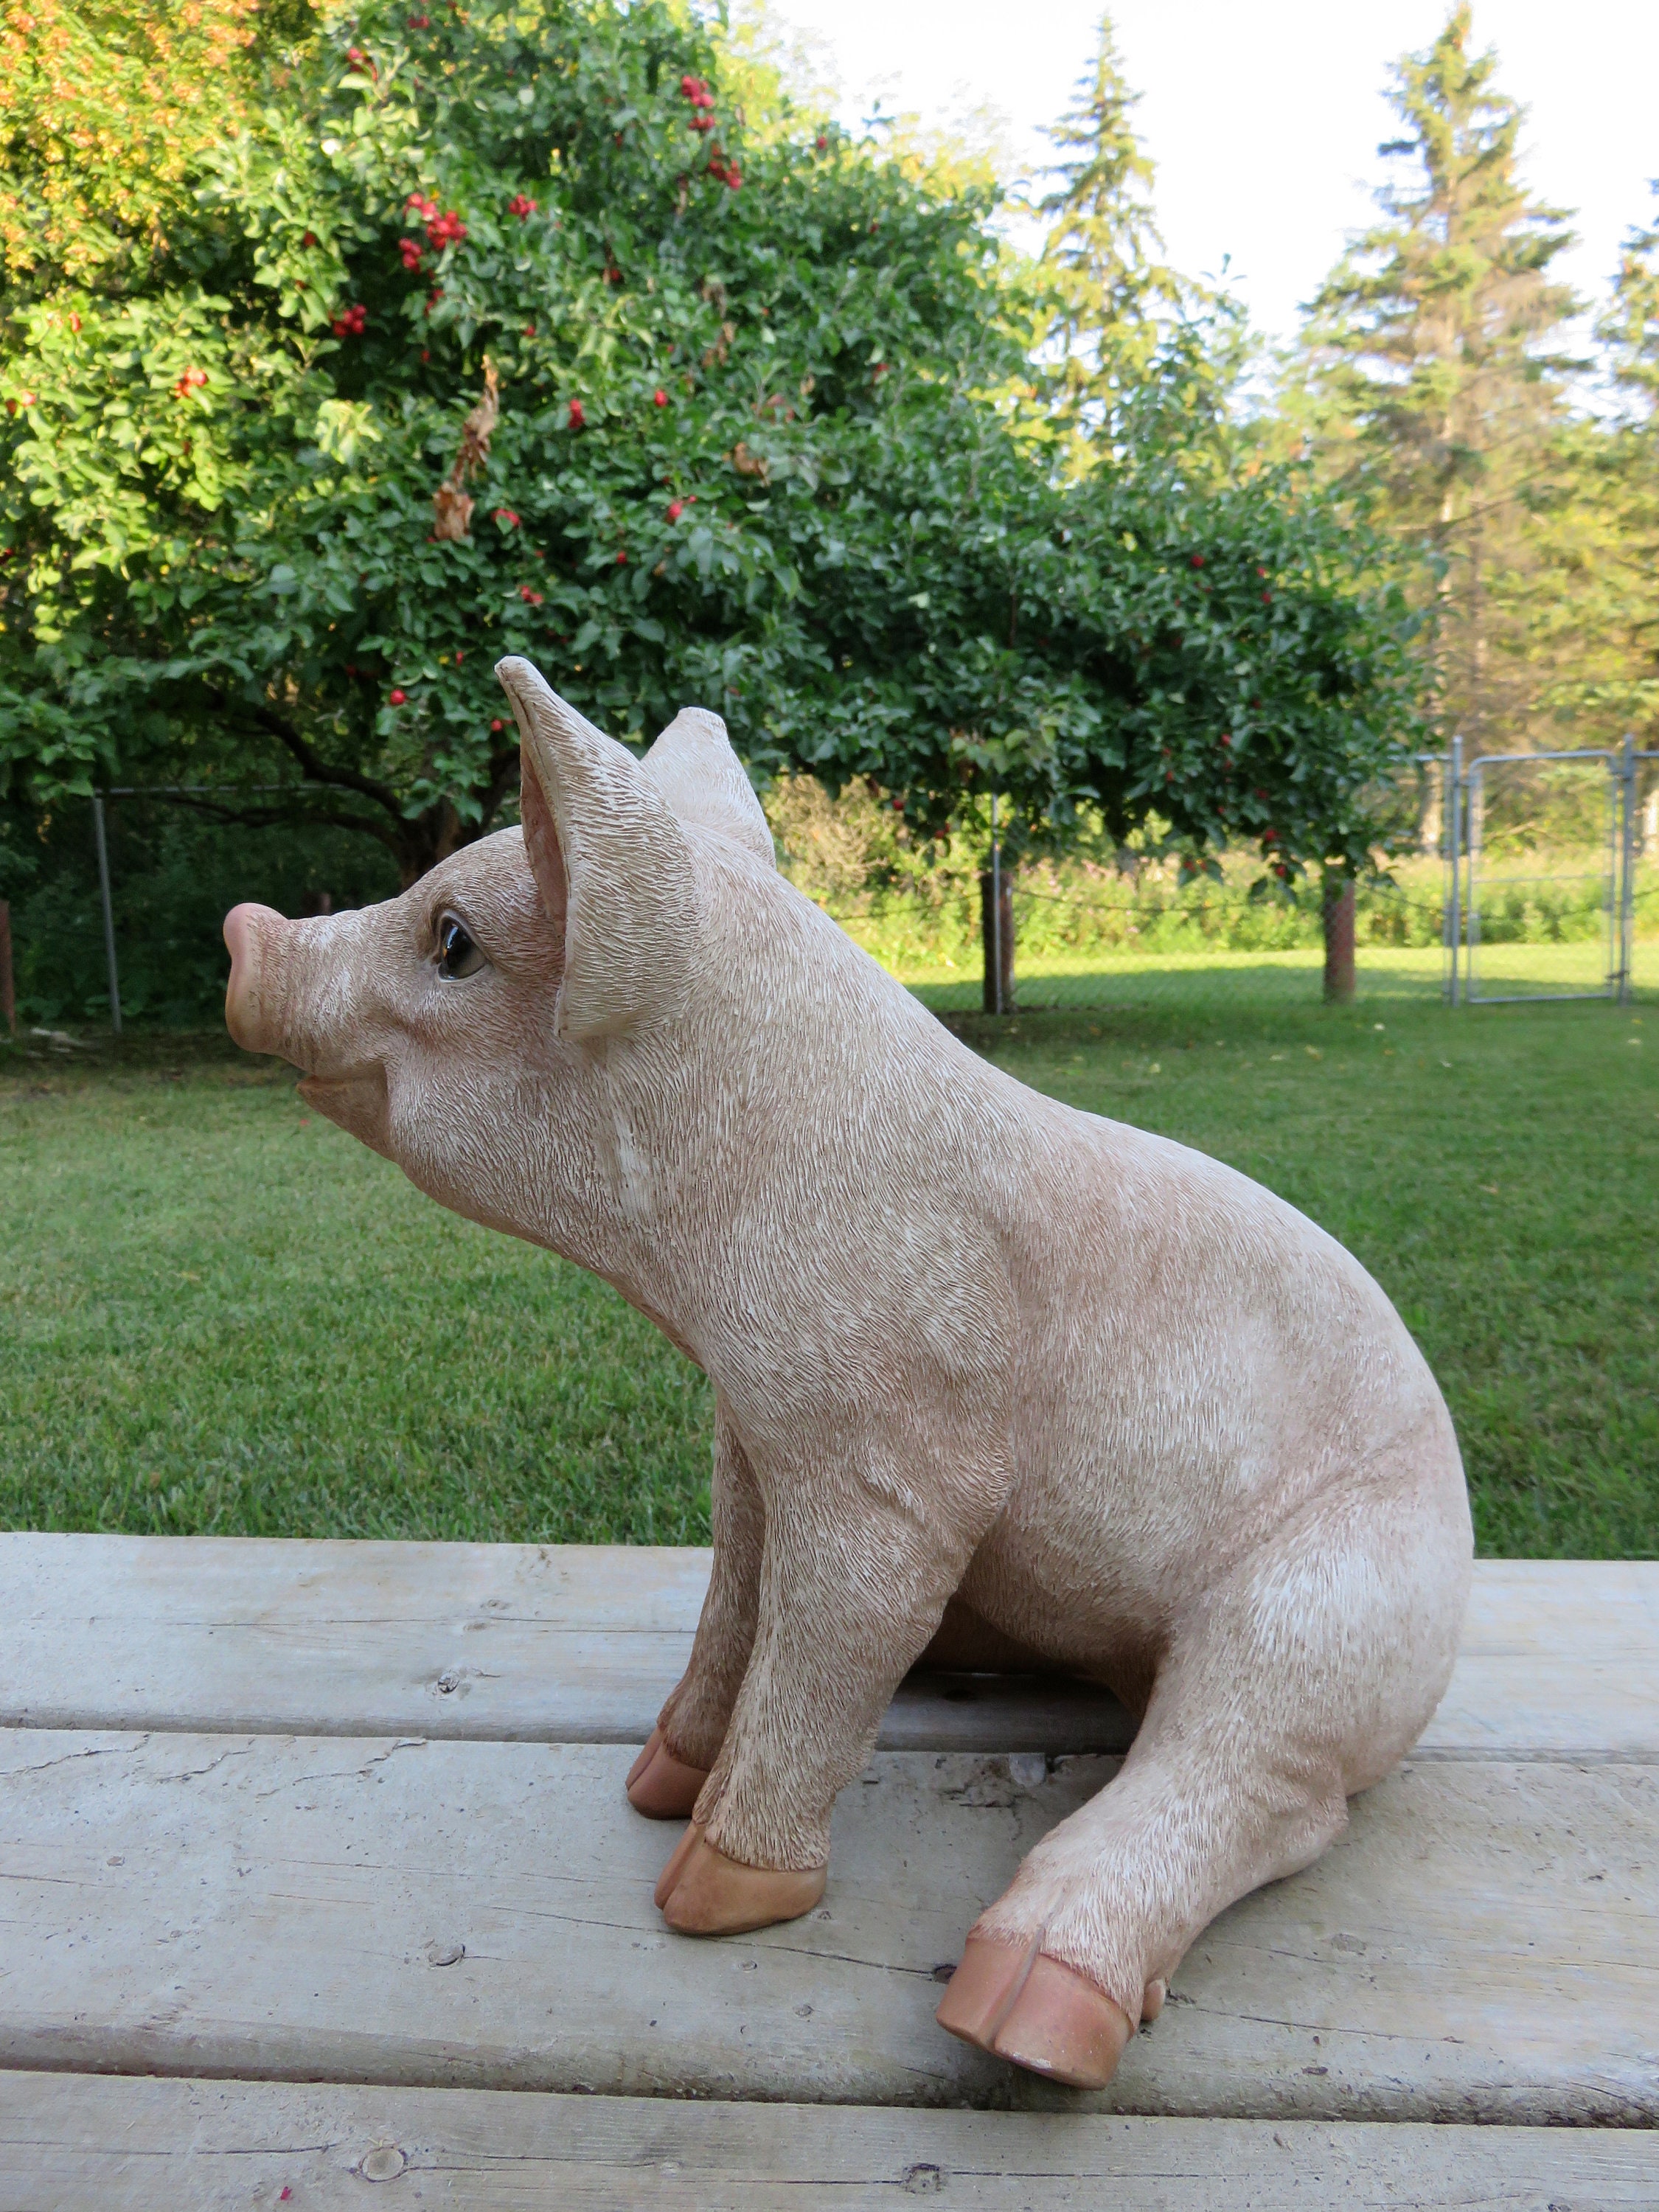 Spotted Baby Pig Sitting Piglet Yard Ornament Resin Figurine